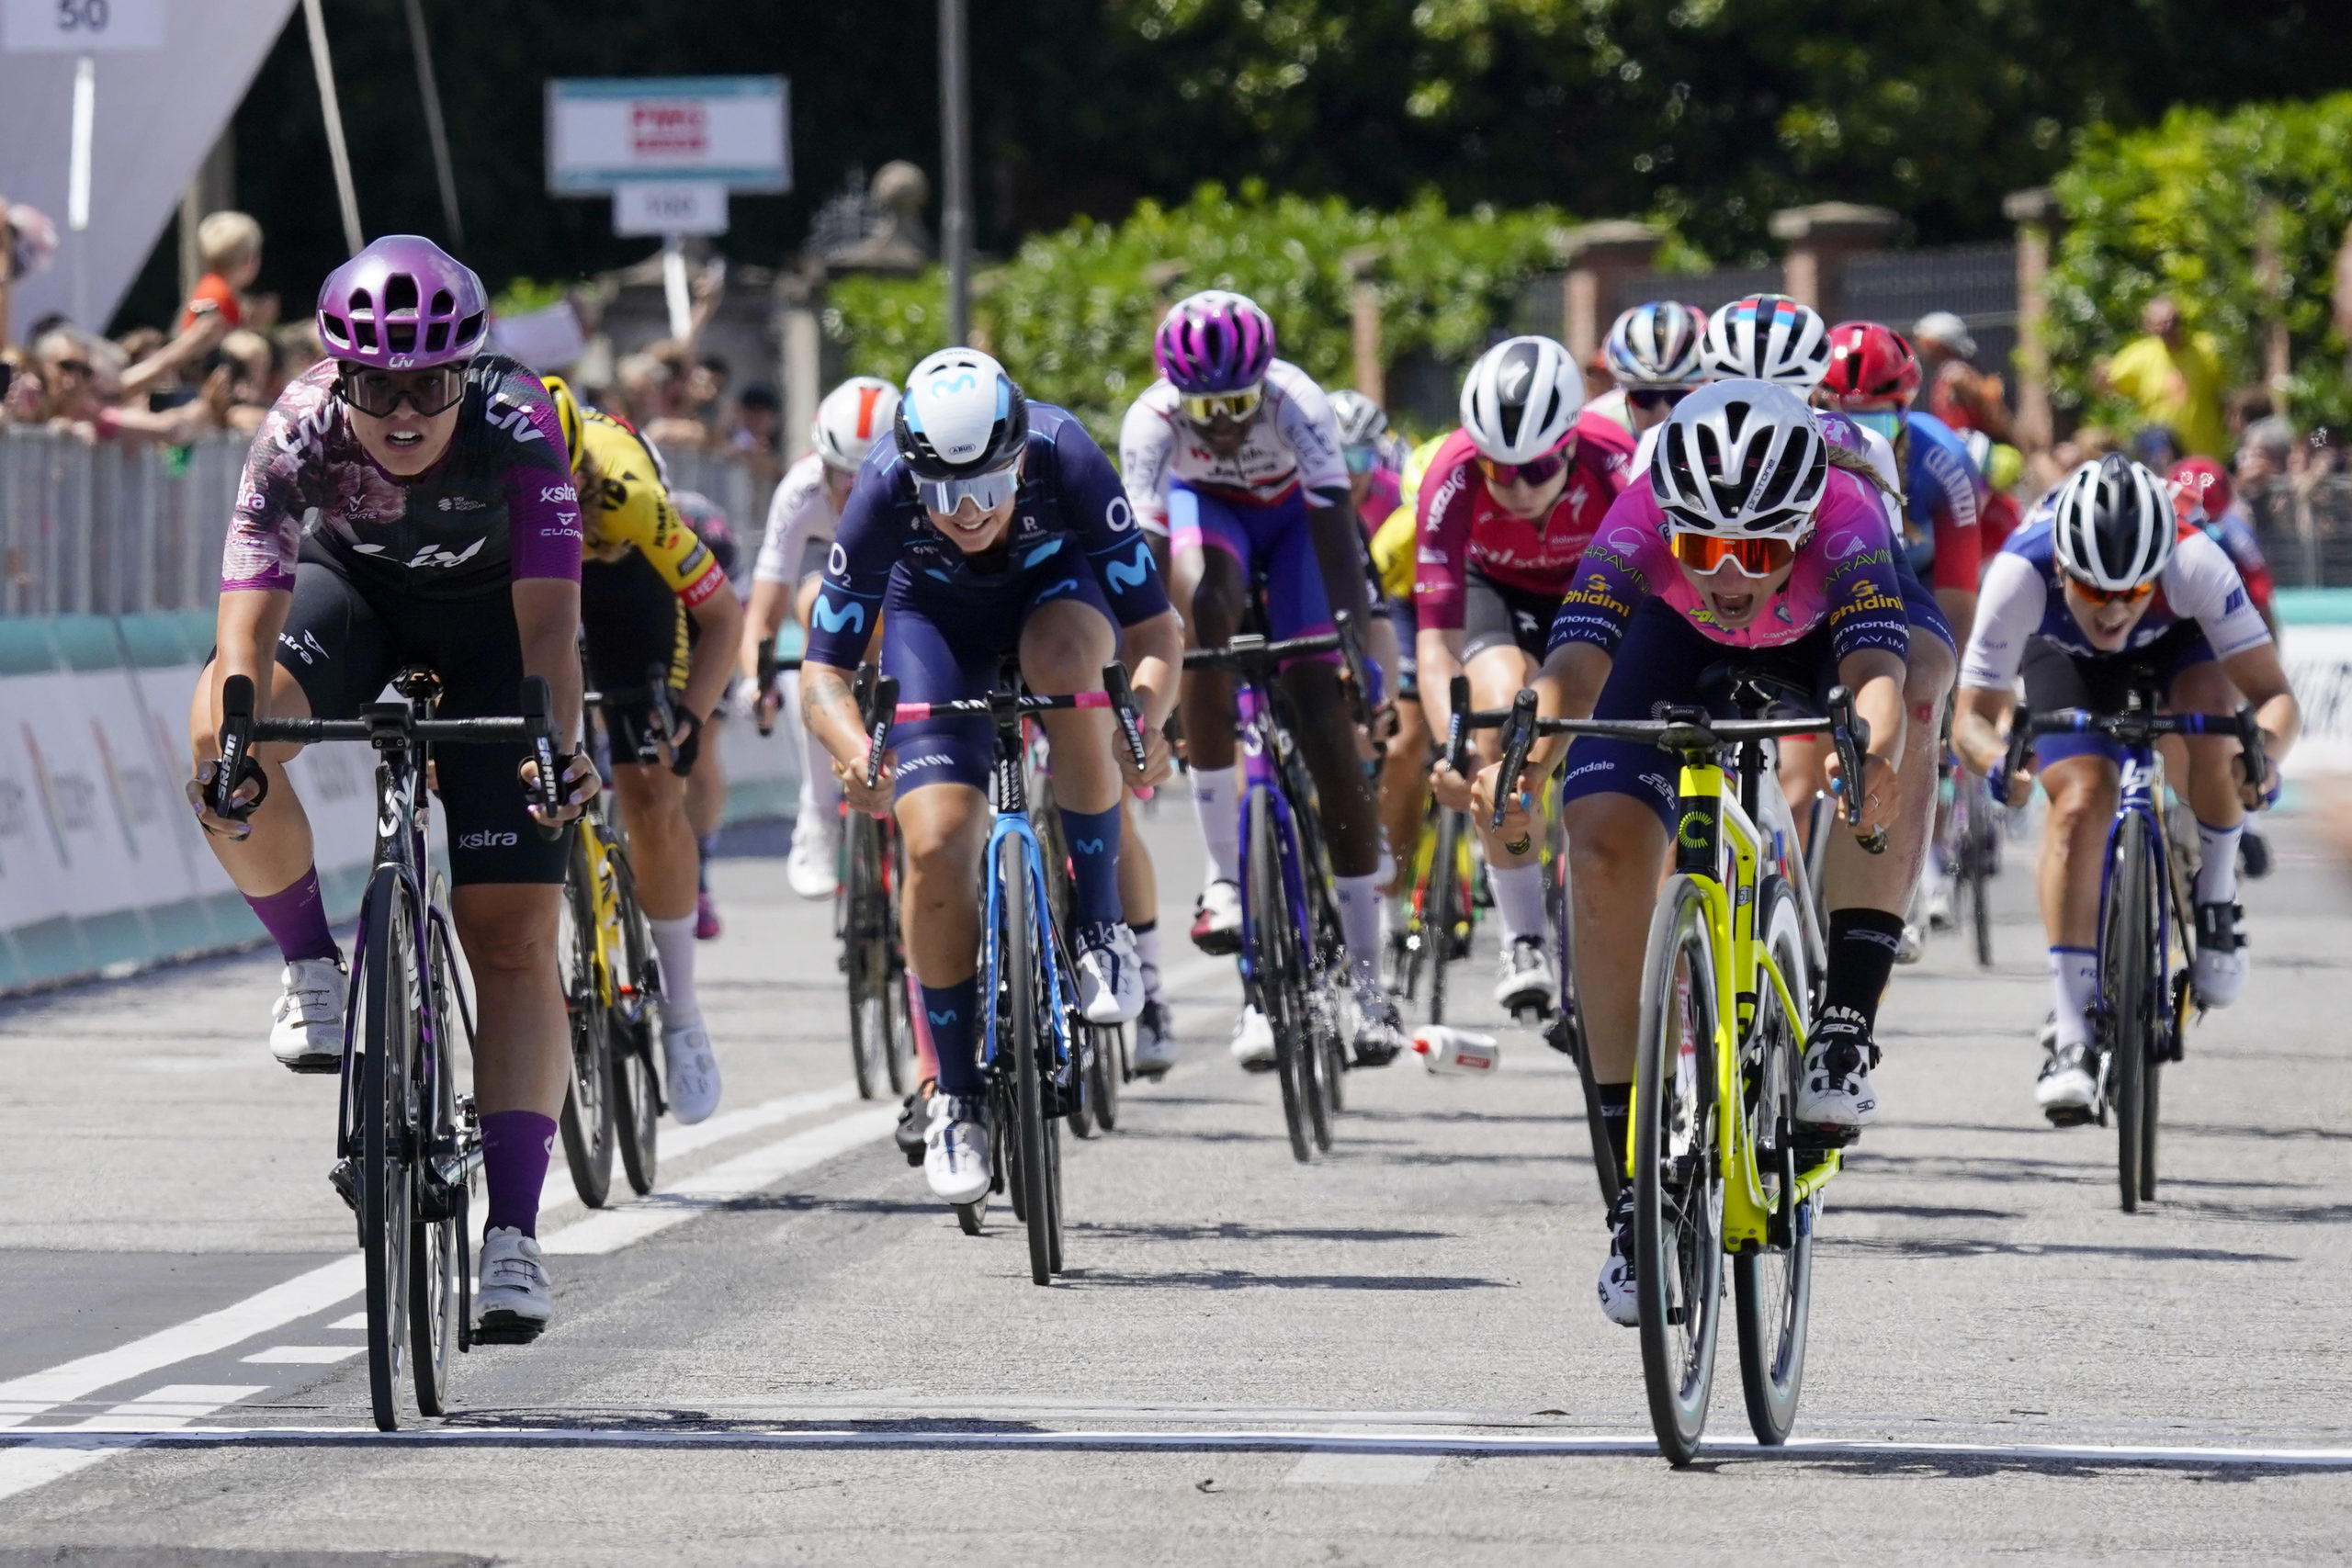 GRAND FINALE OF GIRO DONNE 2022 WITH ITS 10th STAGE “ABANO TERME – PADUA”